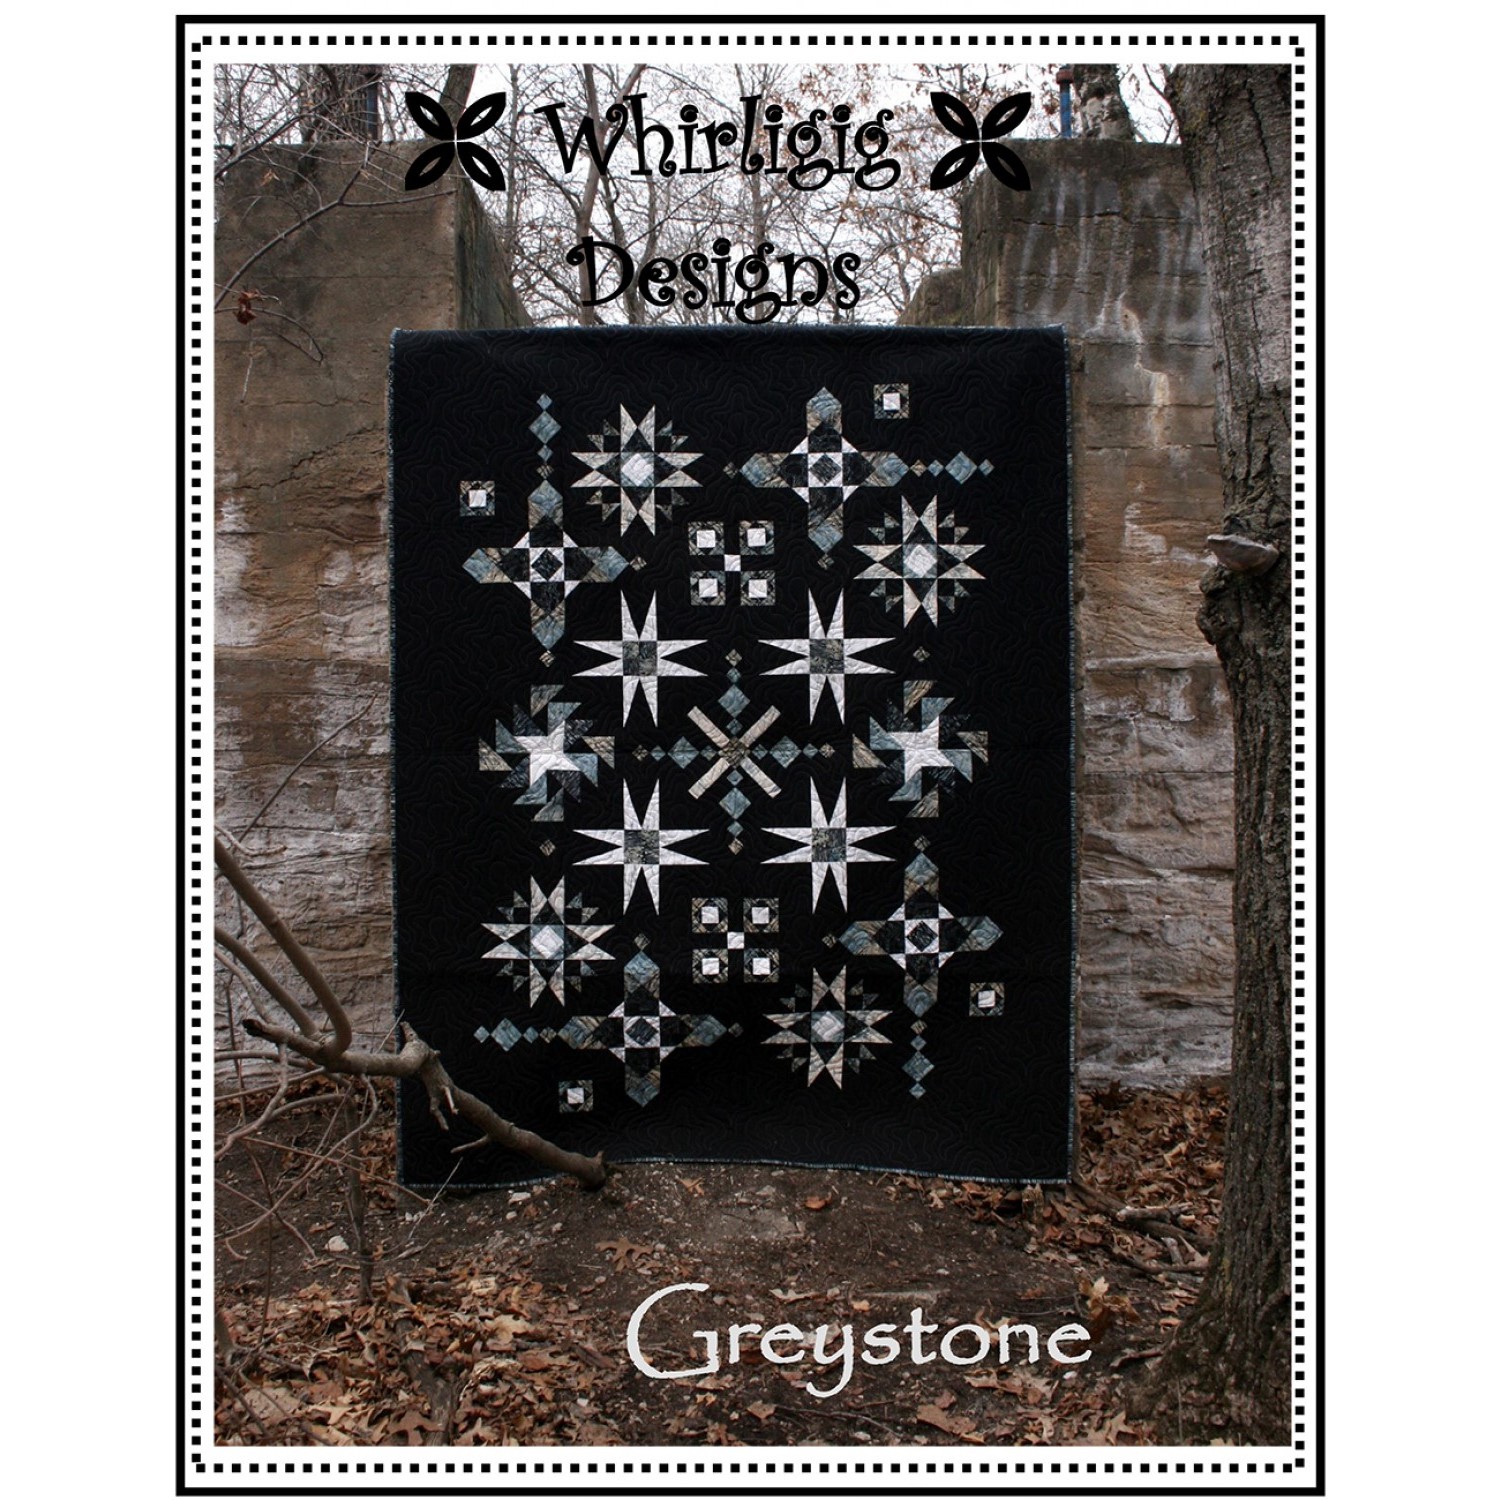 Creative Grids Whirligig Template - A Review